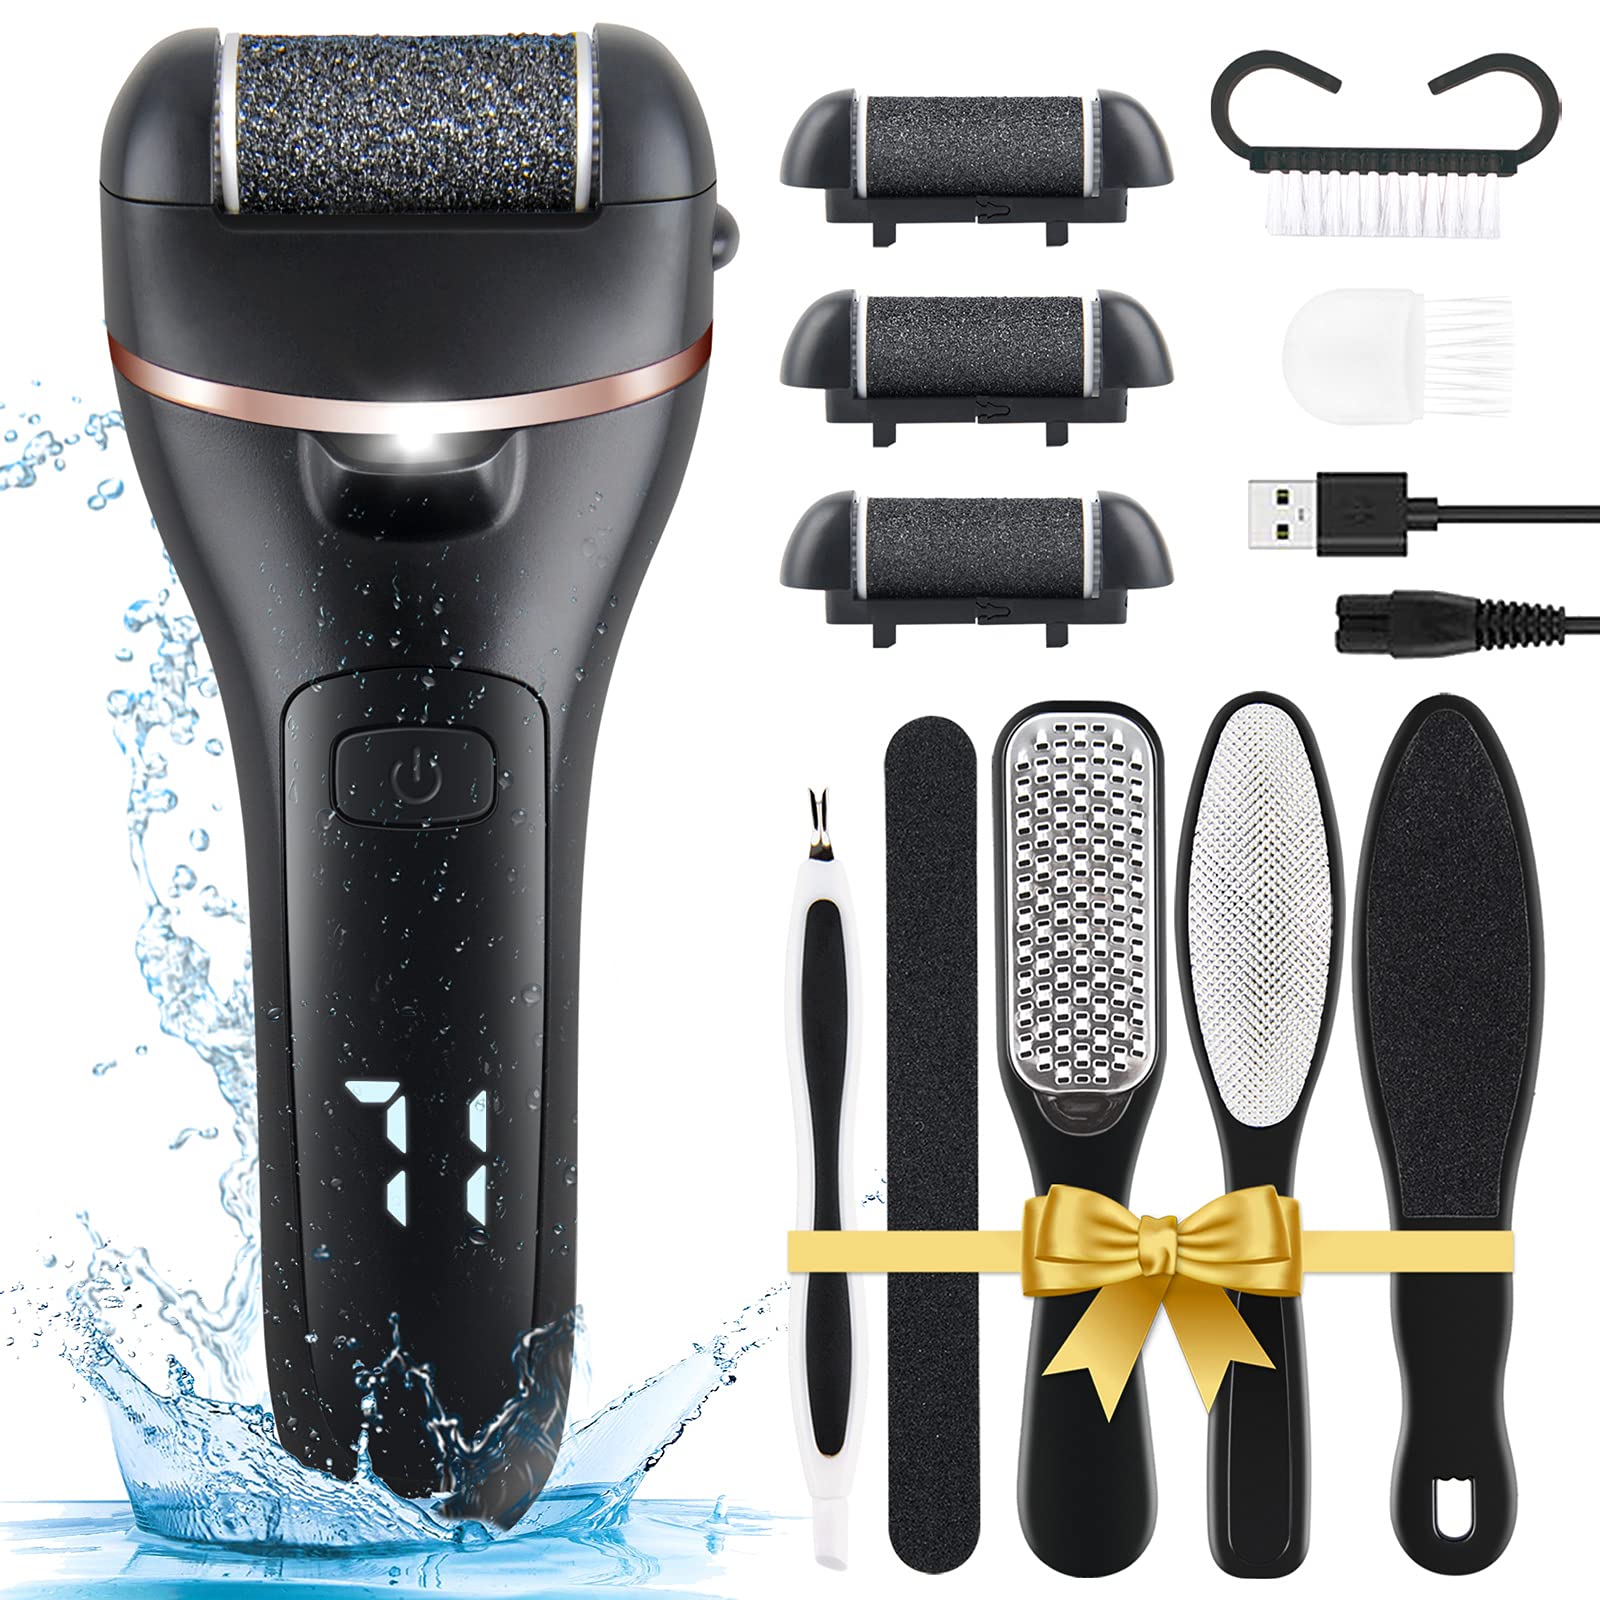 ZOUYUE Electric Foot File Pedicure Set, Rechargeable Waterproof Hard Skin Remover with 3 Rollers and 2 Speeds, Callus Remover Foot Care Gift Kit for Cracked Heels Calluses and Dead Skin(Black)